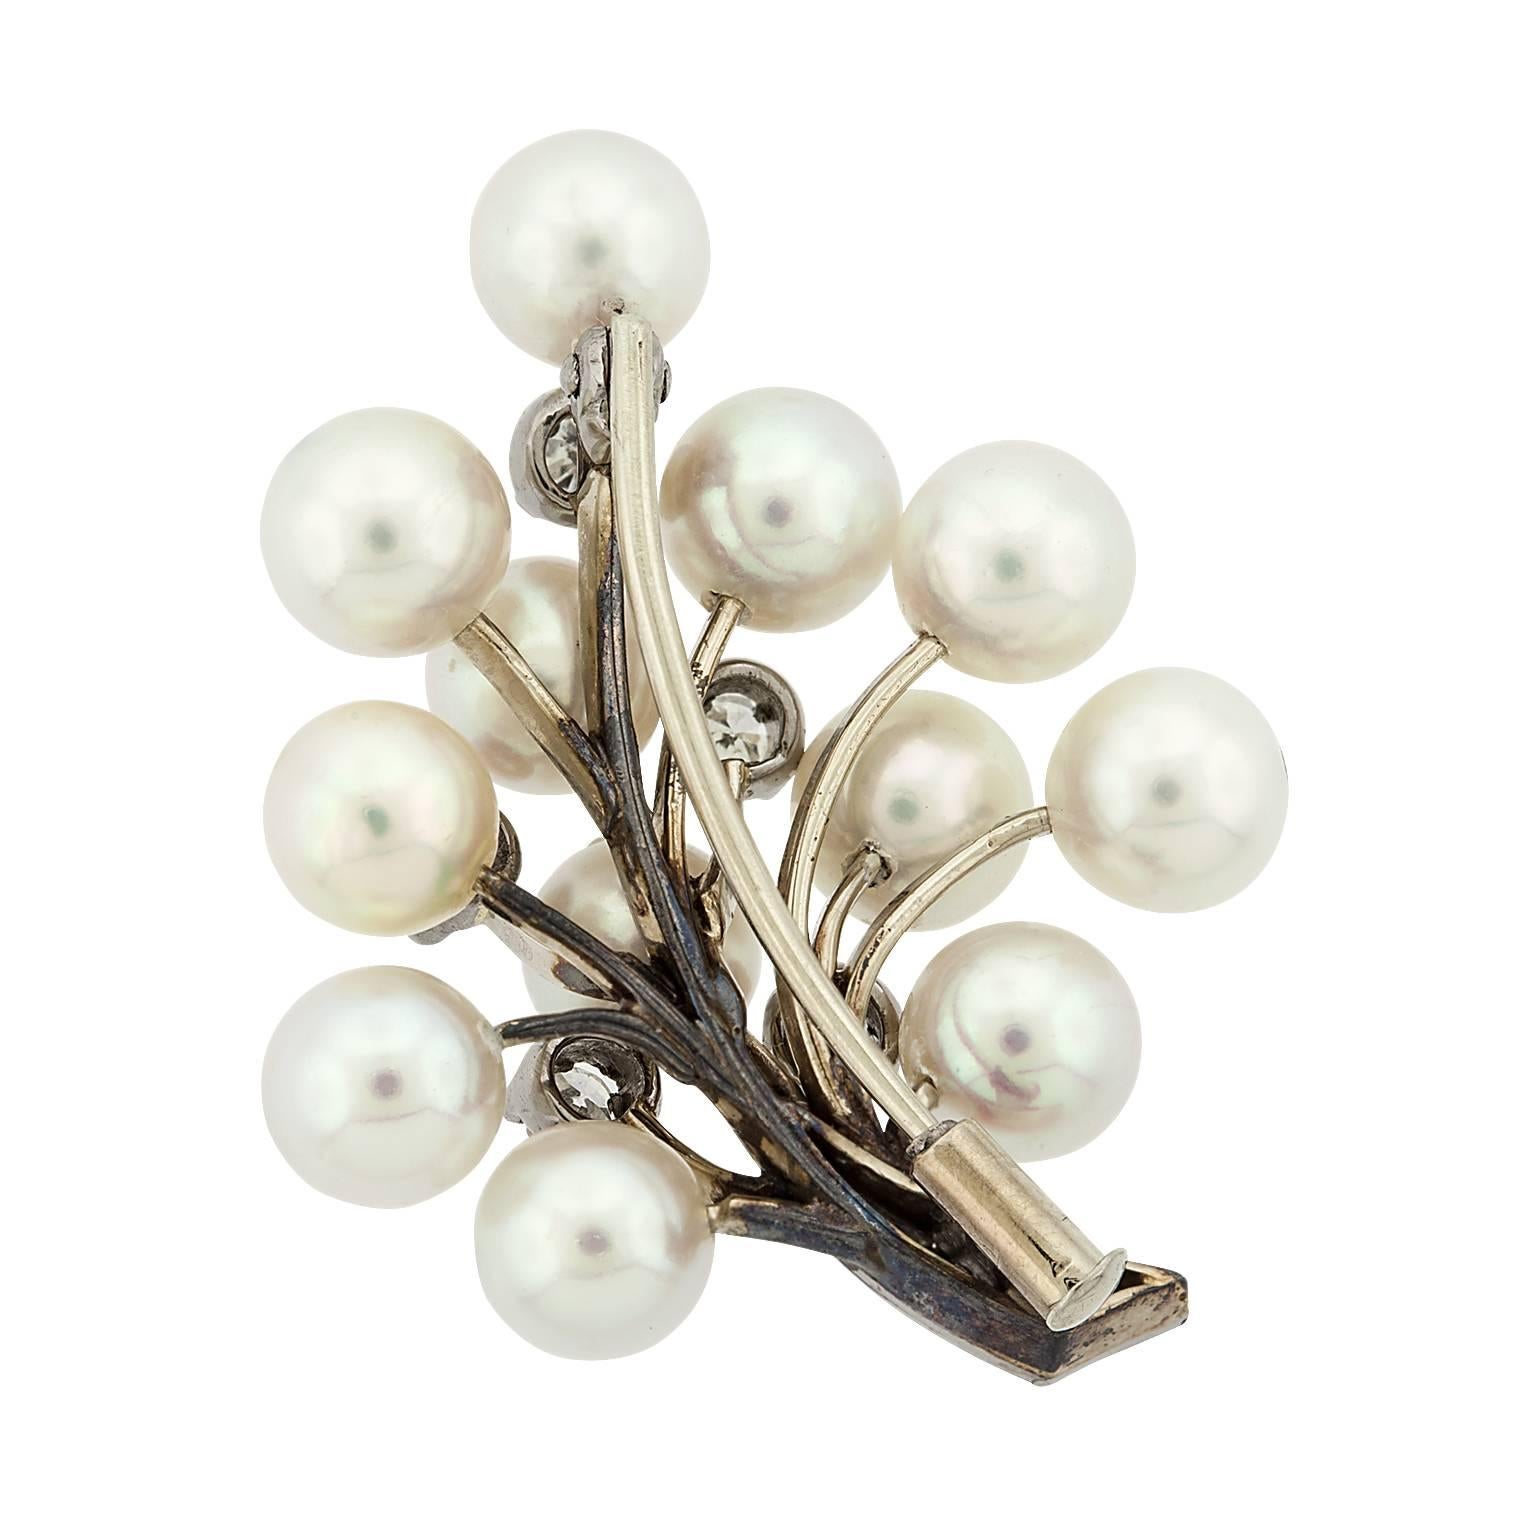 A cultured pearl and round diamond 18 karat white gold leaf brooch.  The pearls are set on posts branching out from the center, with five diamonds scattered throughout, and a diamond stem.  The pearls average 6.00 x 6.50 millimeters.  The diamonds